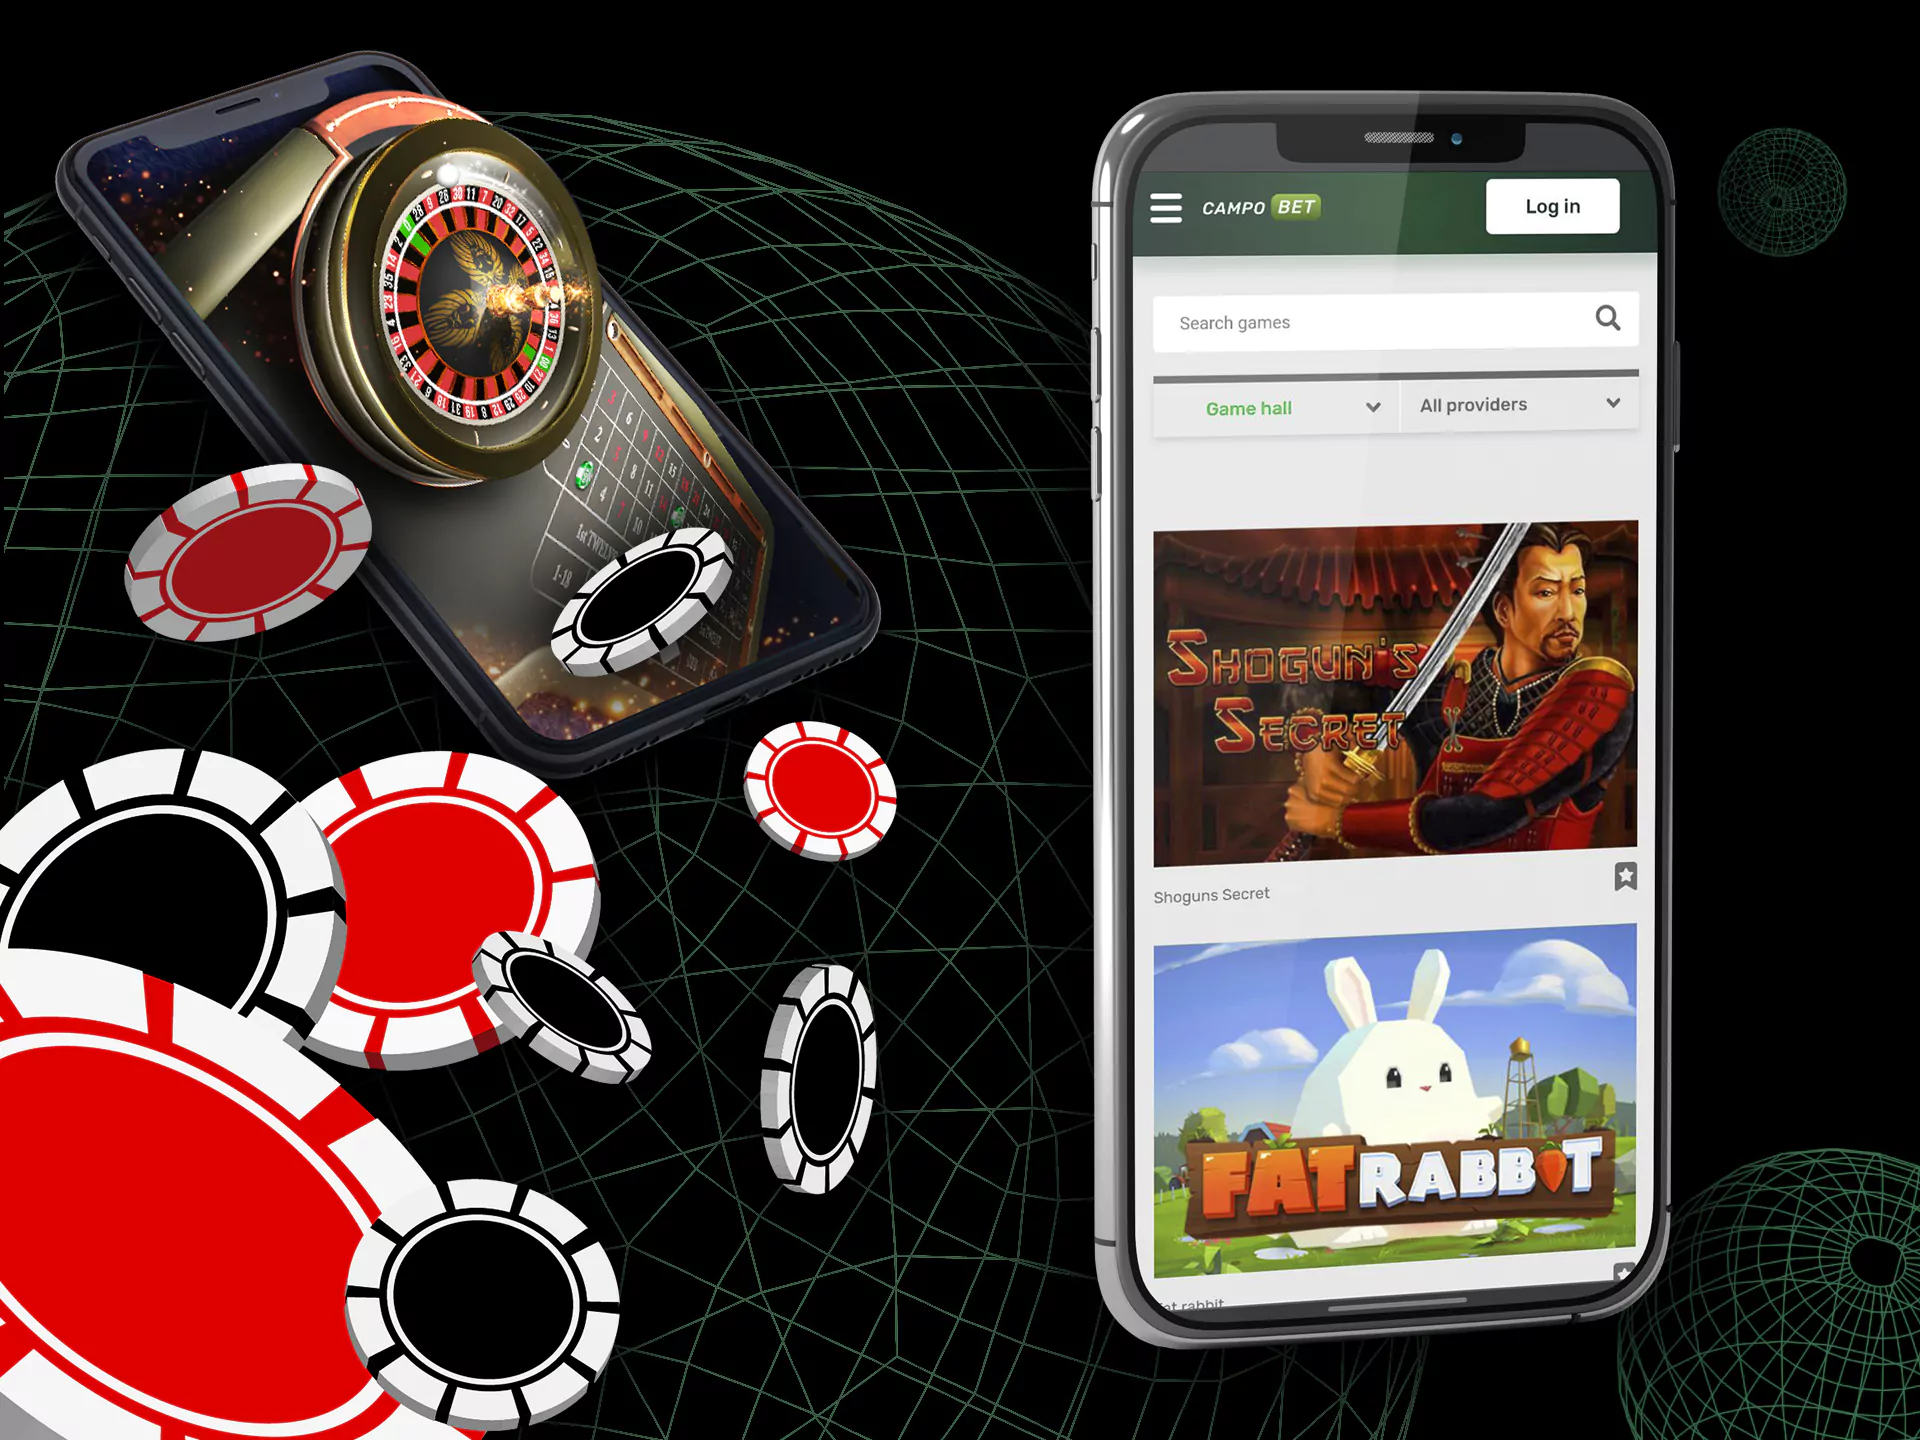 In the casino section of the app, you can play slots, roulette, poker, baccarat, and other games.